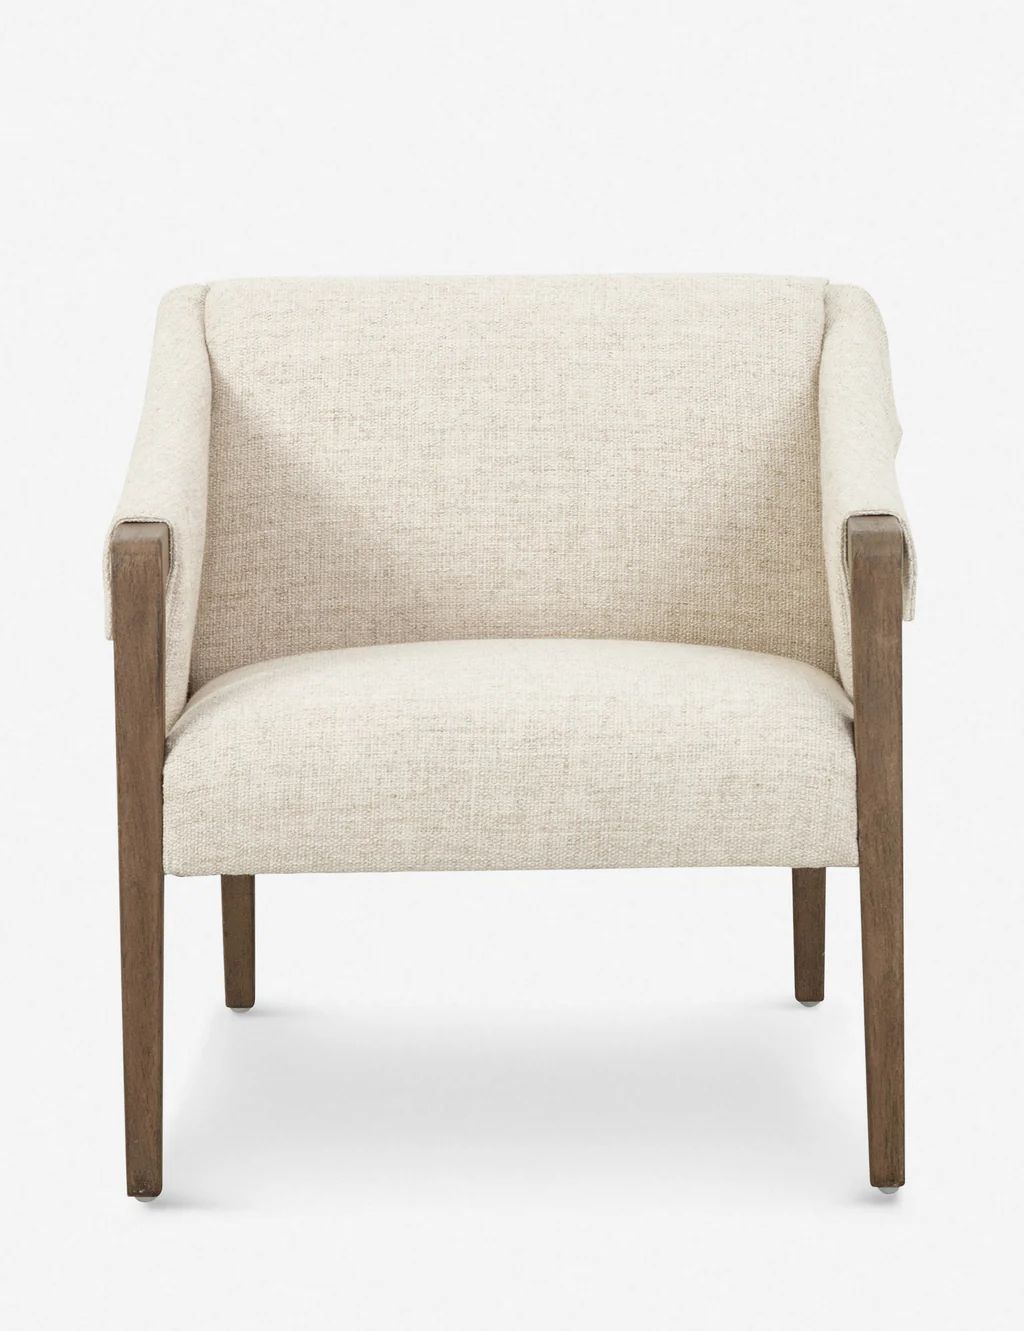 Whittier Accent Chair | Lulu and Georgia 